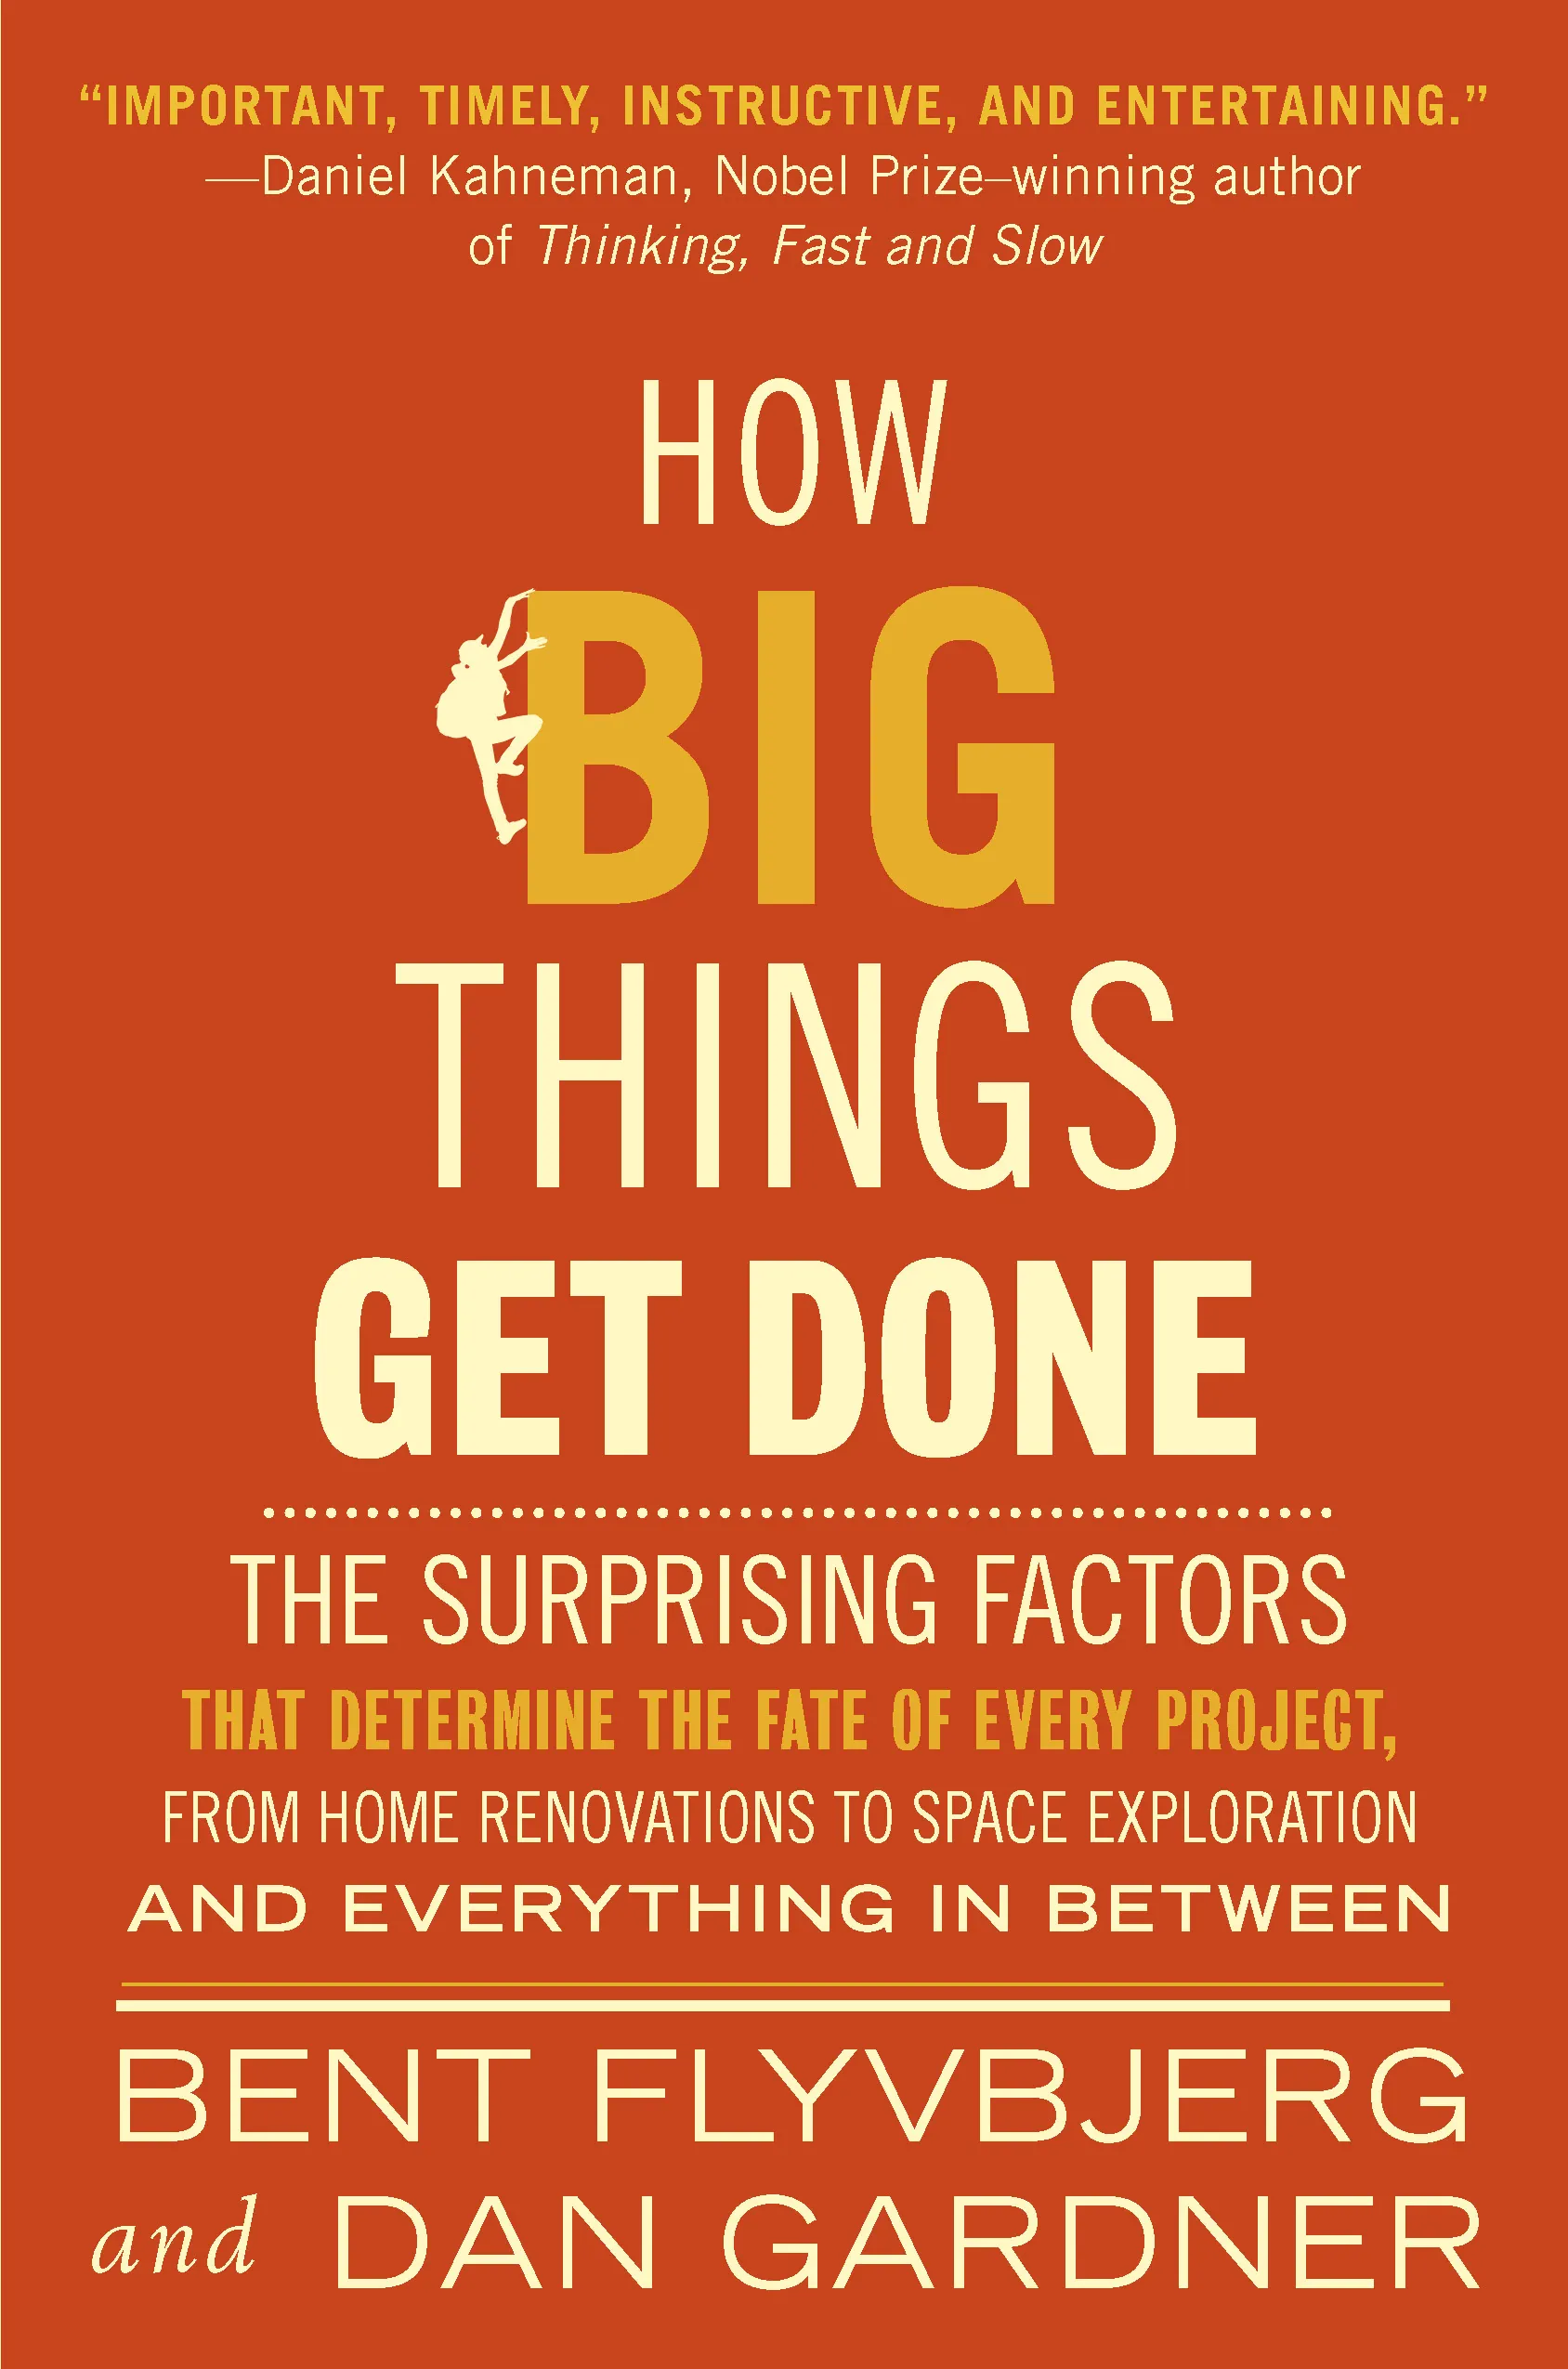 Cover of the book title How Big Things Get Done